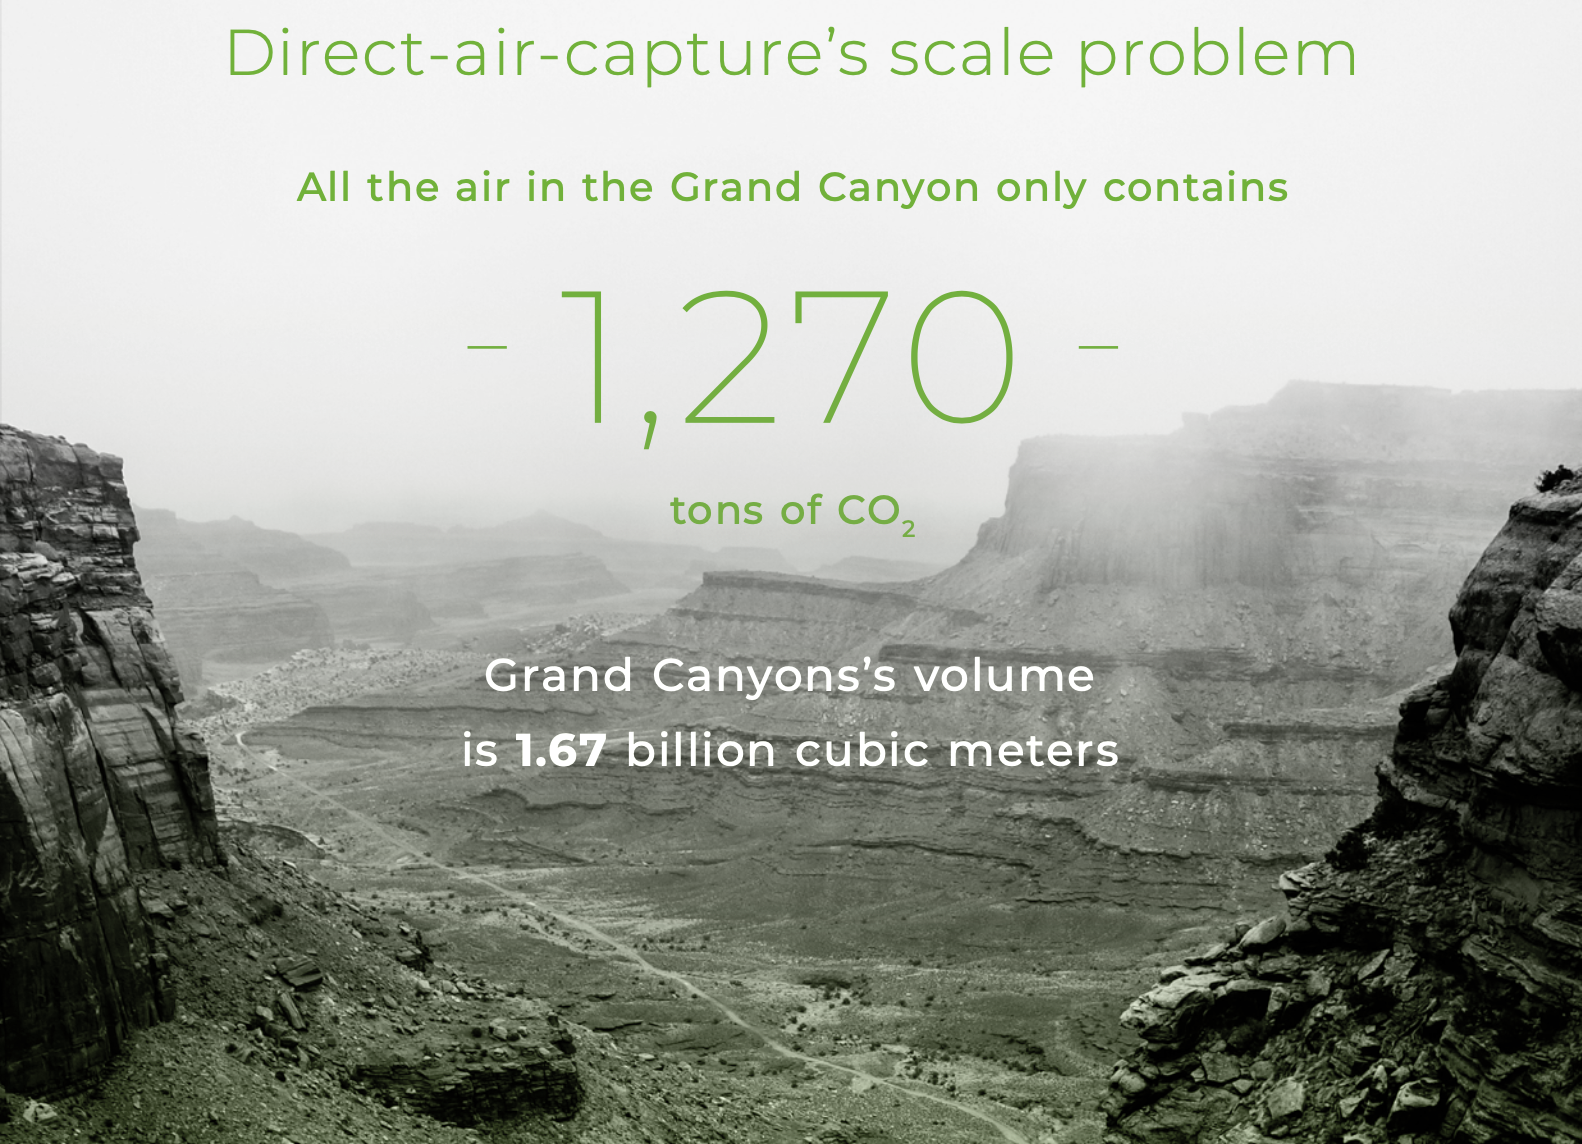 Direct air capture's scale problem illustrated by Grand Canyon only having 1,270 tons of CO2 in all of the air in it